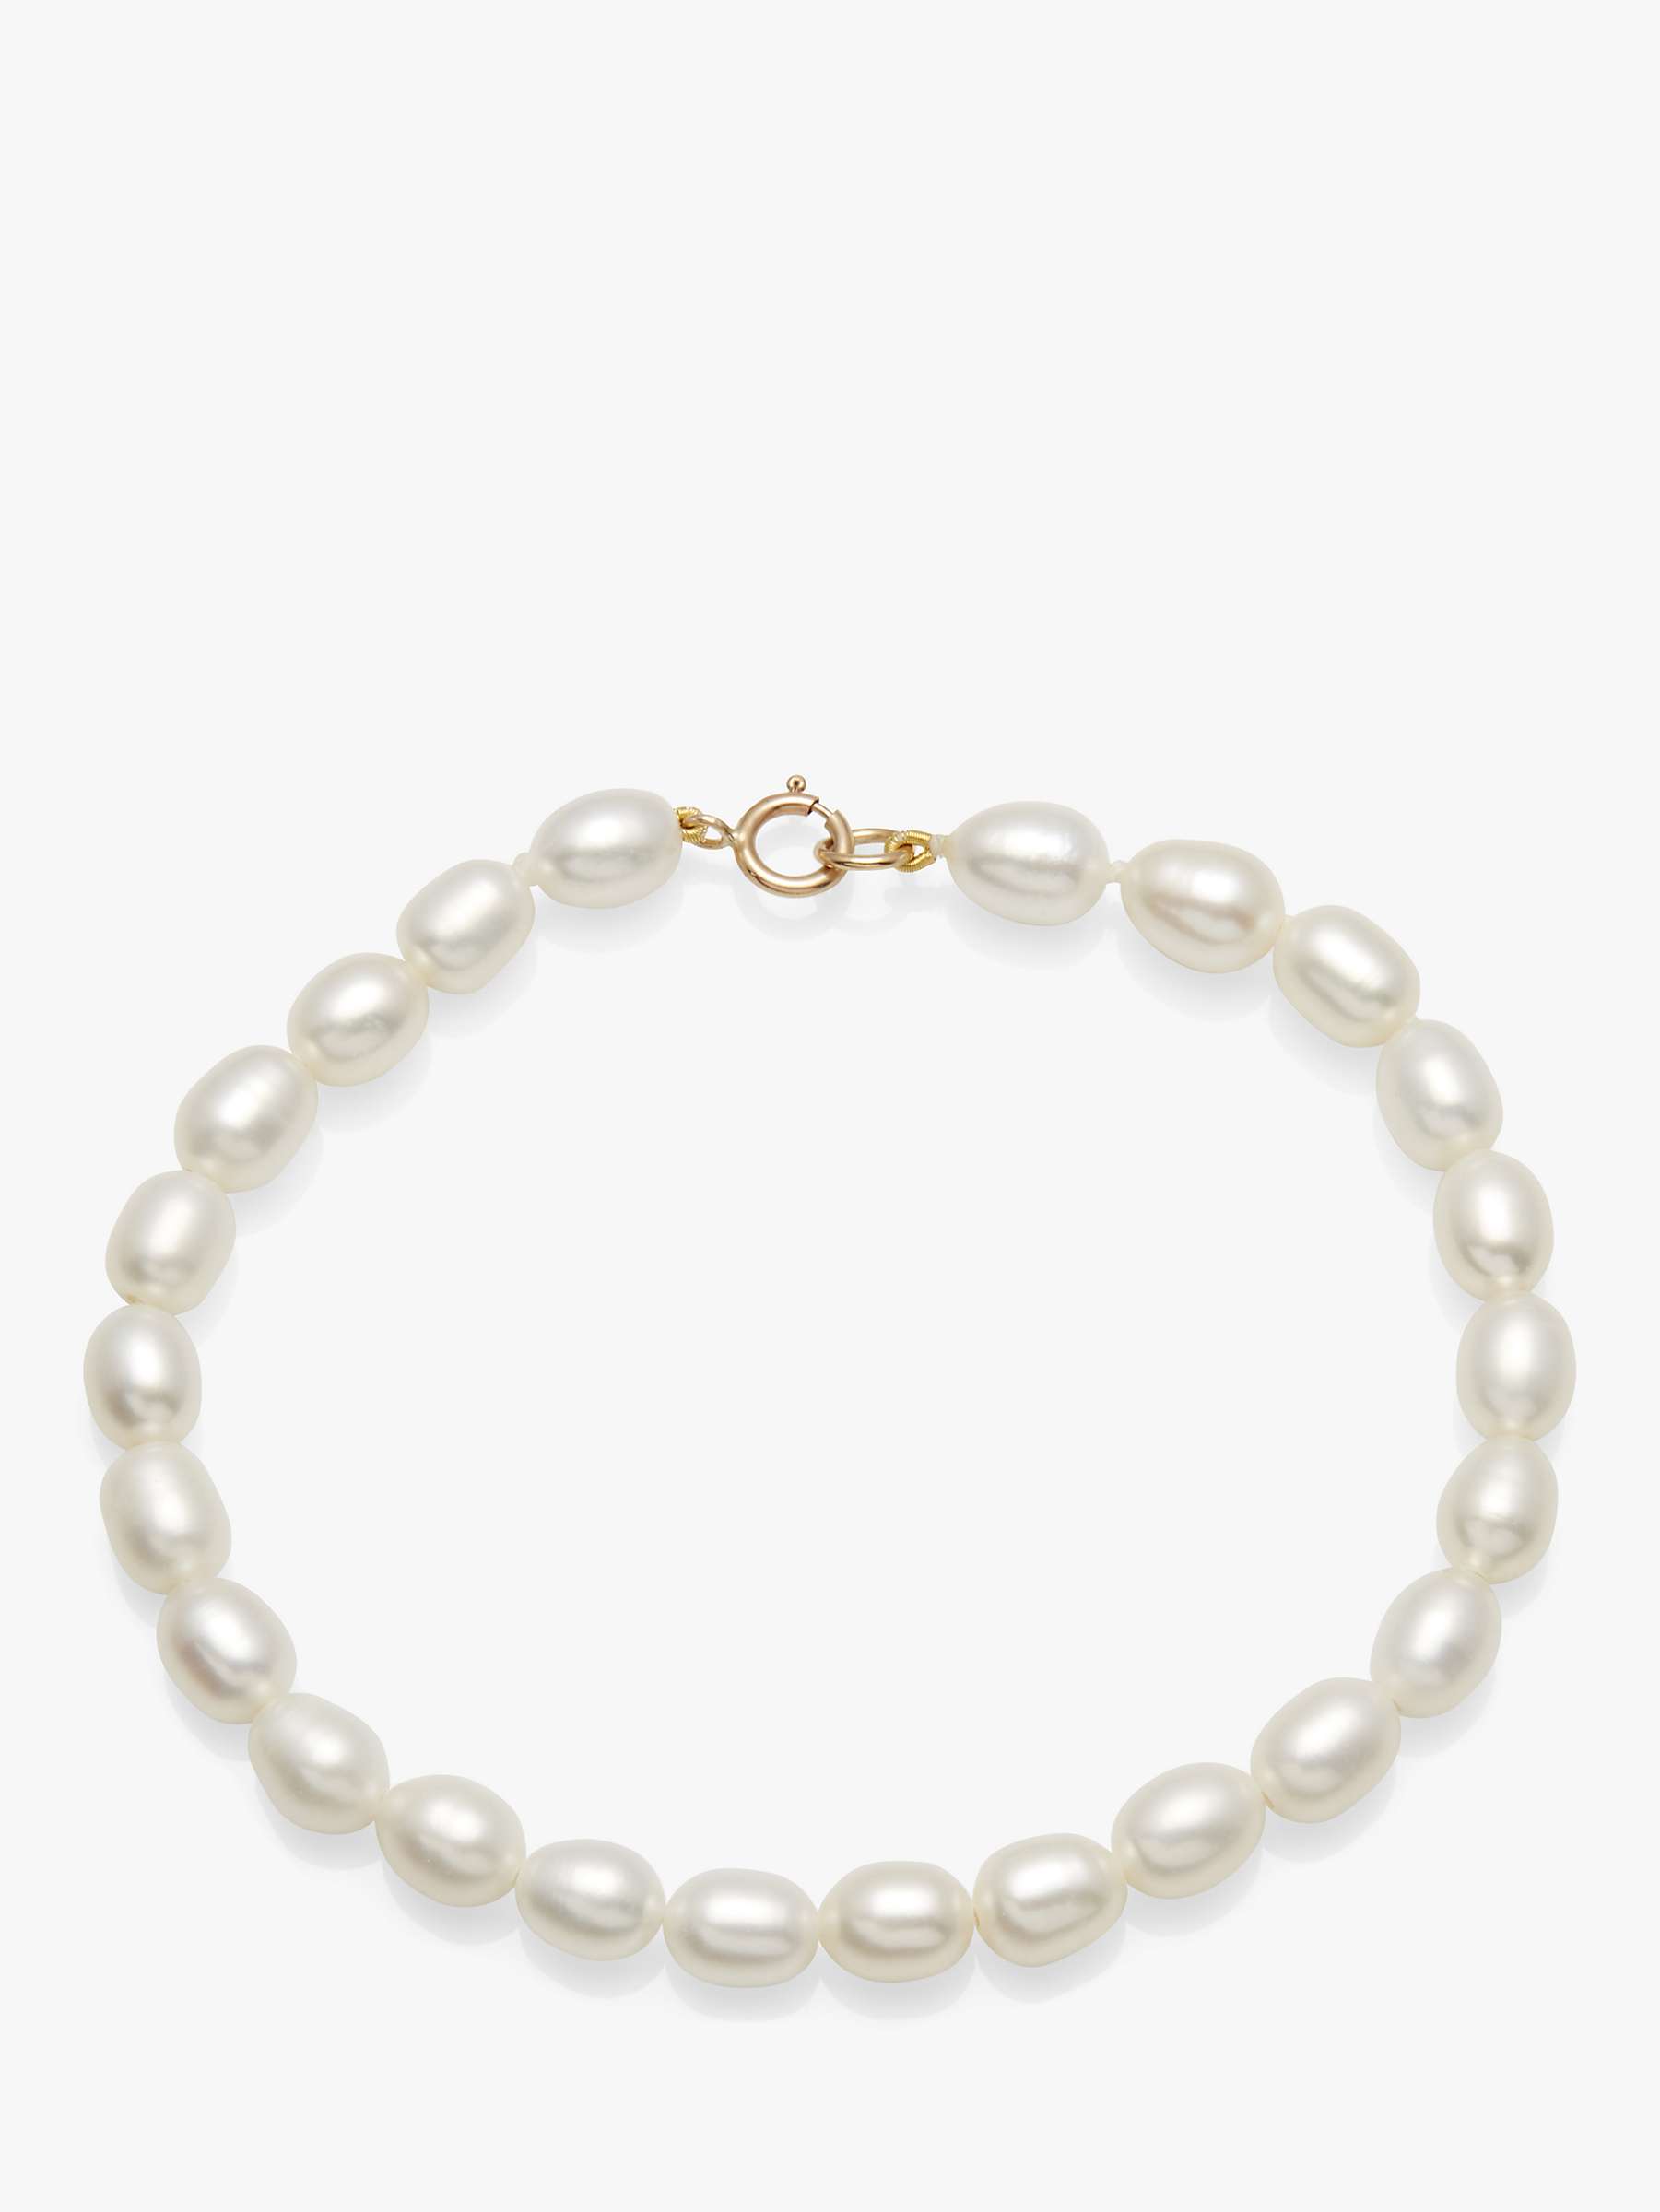 Buy A B Davis 9ct Gold Clasp Rice Freshwater Pearl Bracelet, White Online at johnlewis.com